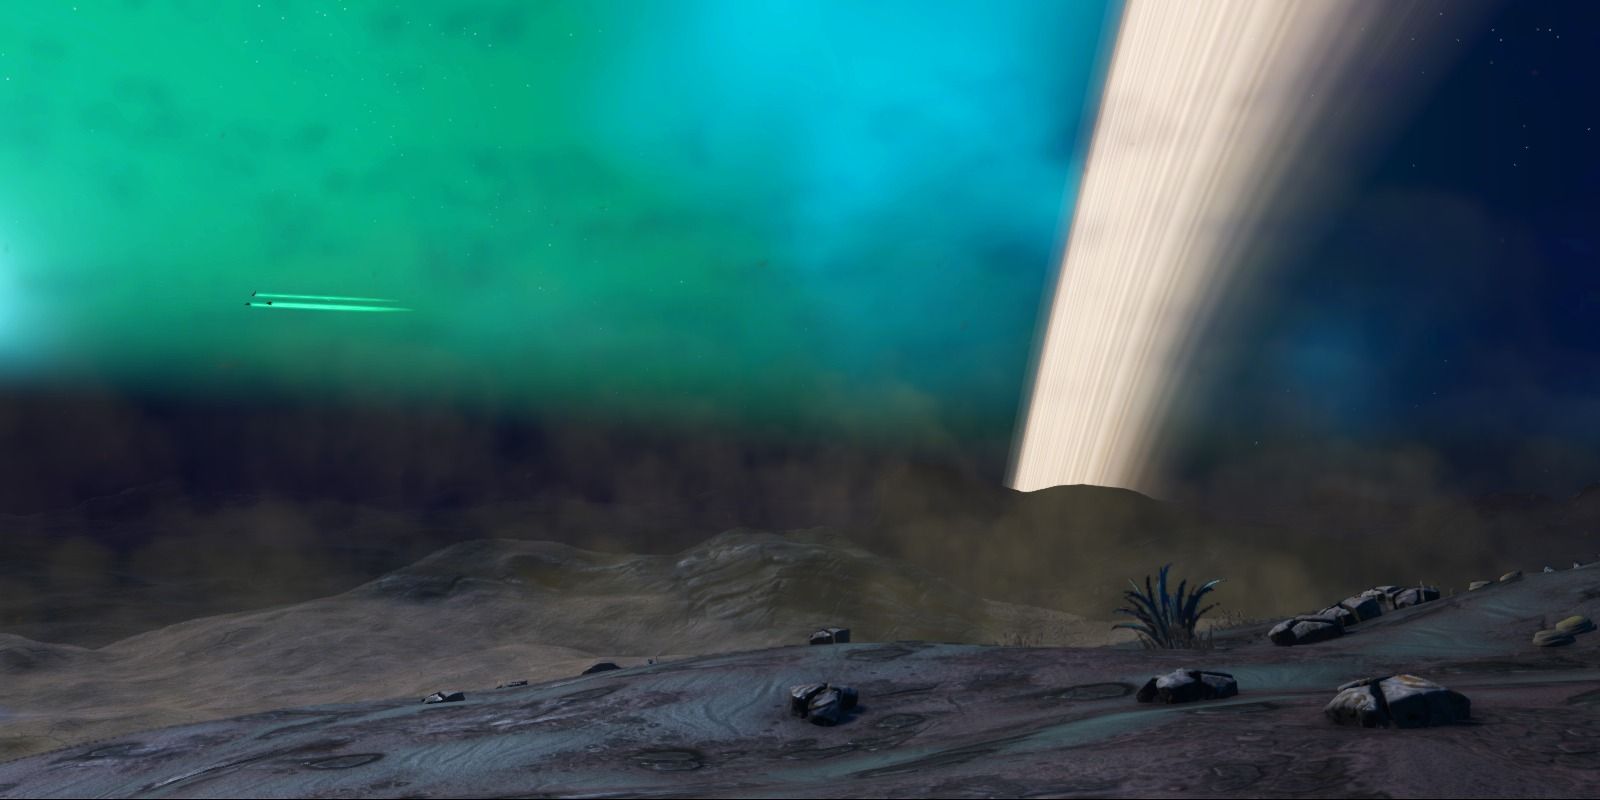 Dead planets surface